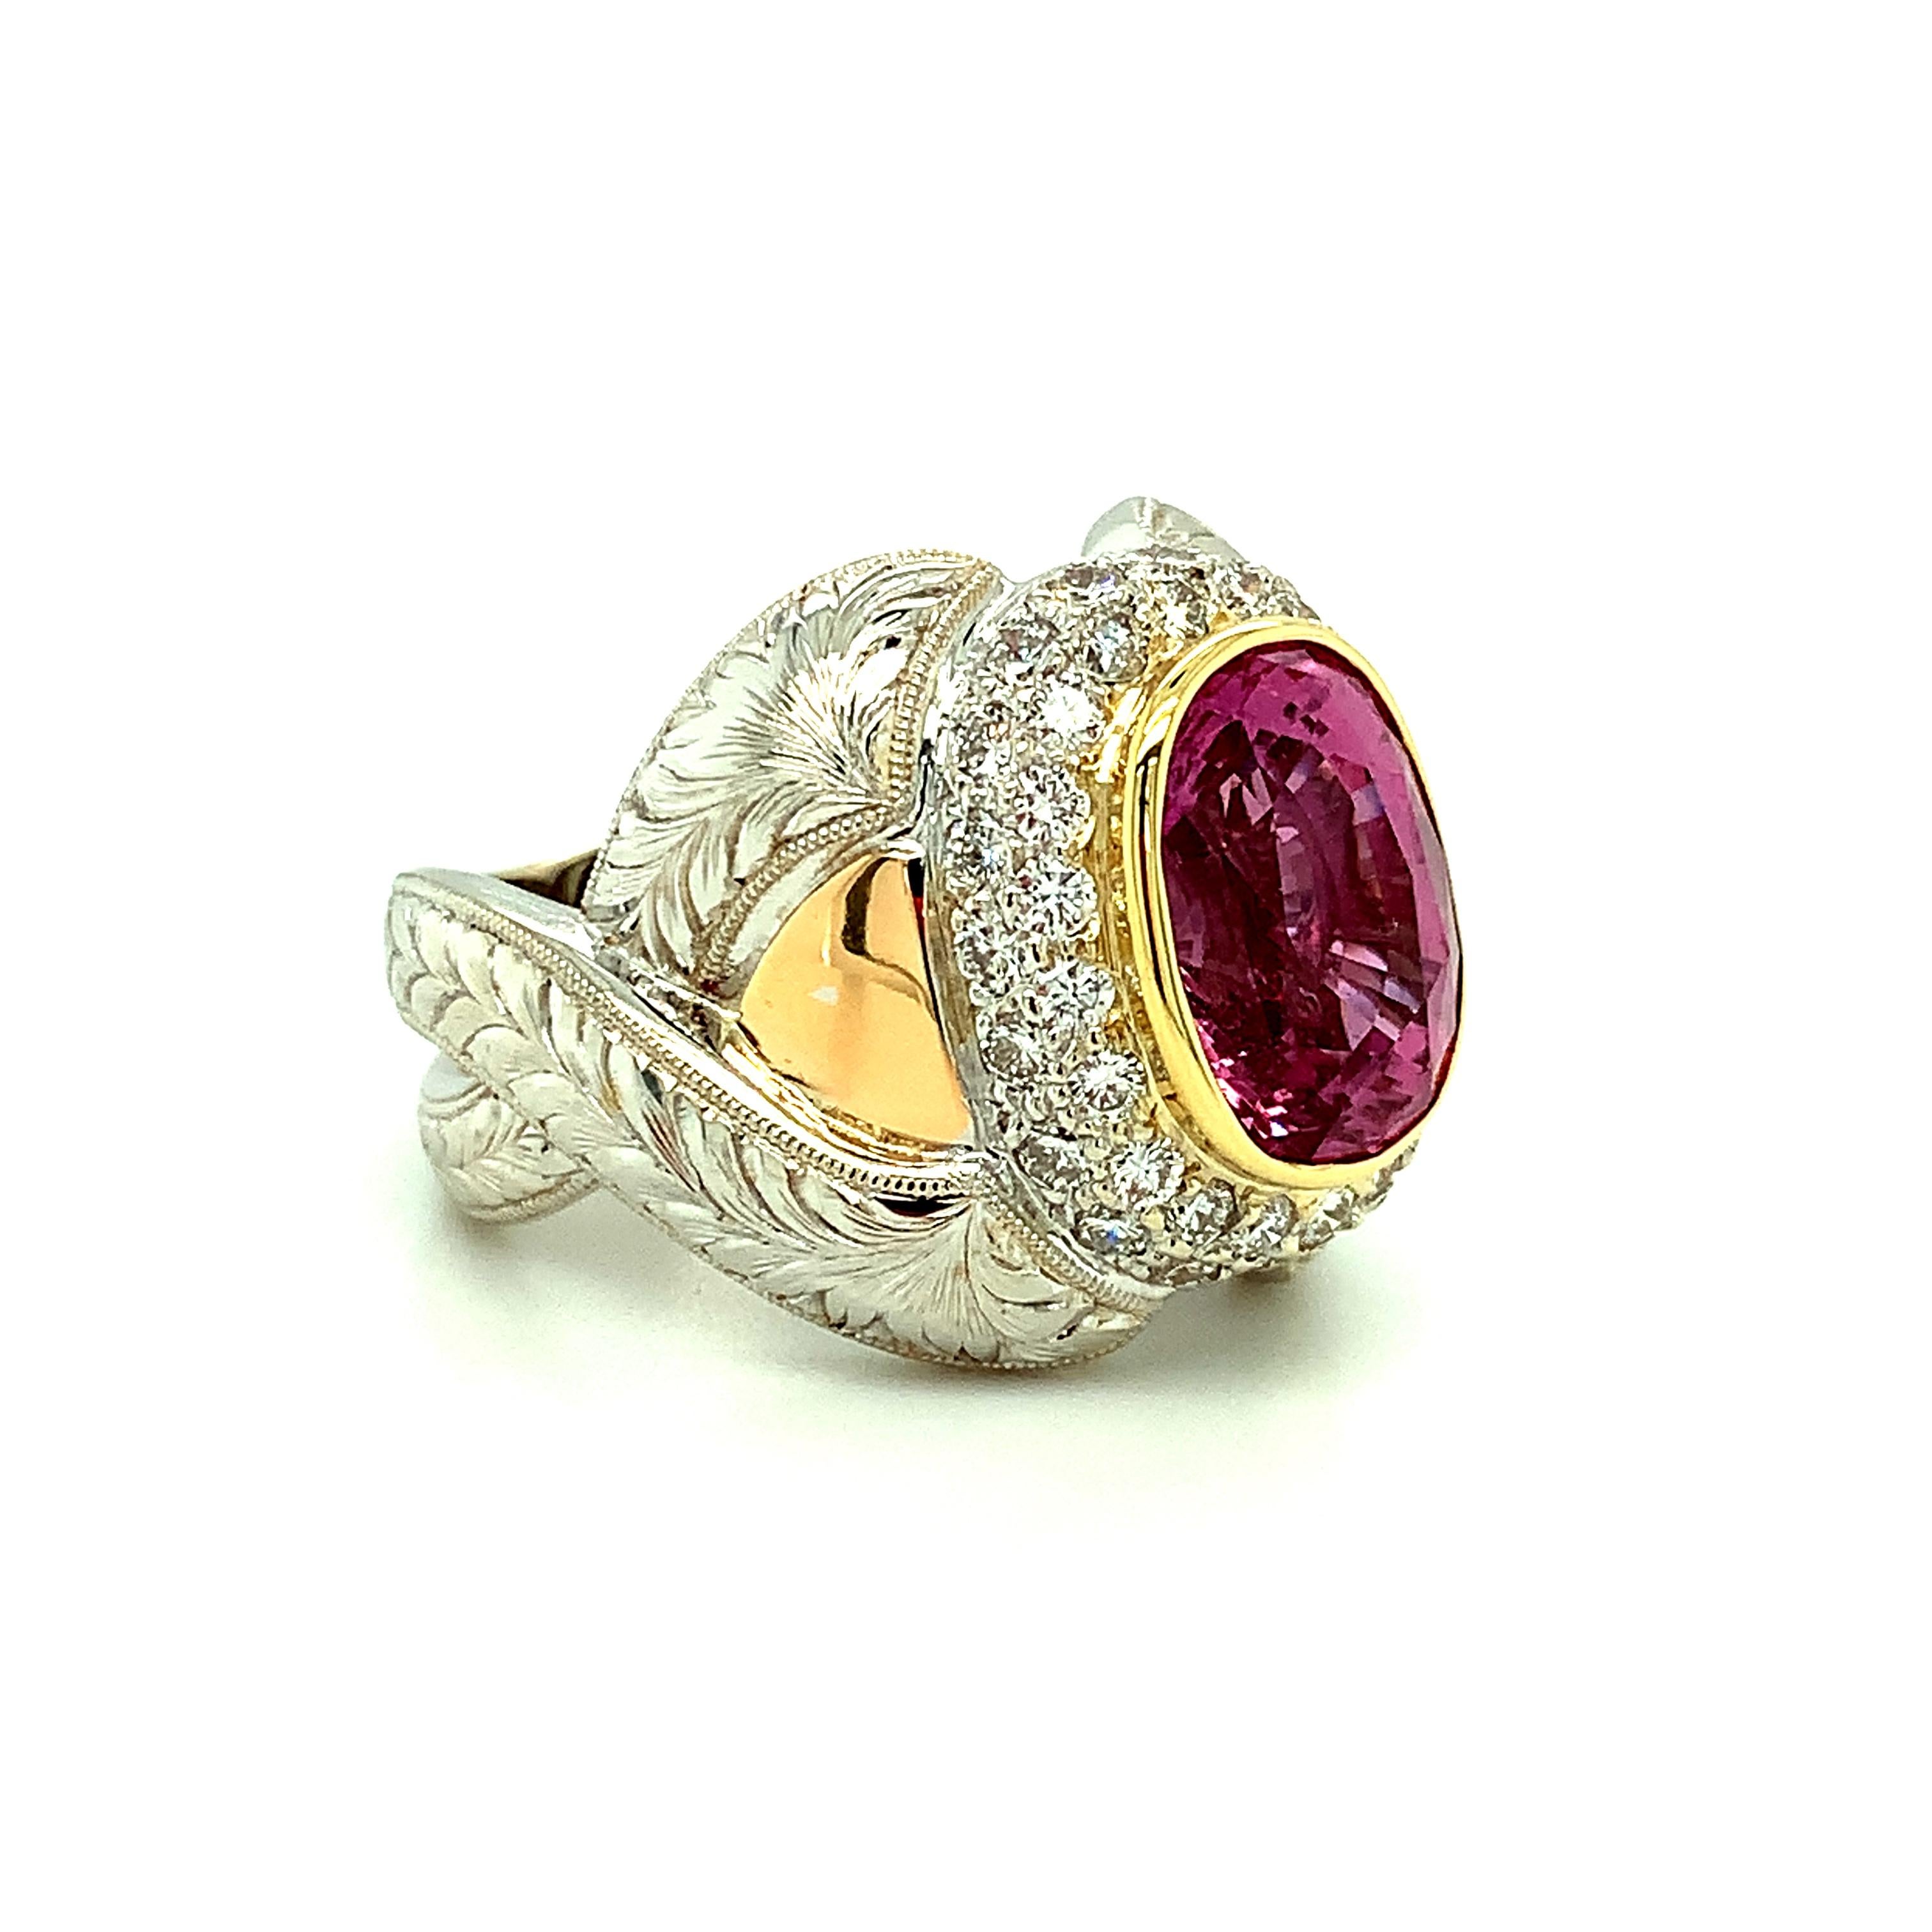 GIA Certified 7.08 Carat Pink Sapphire and Diamond Cocktail Ring in 18k Gold In New Condition For Sale In Los Angeles, CA